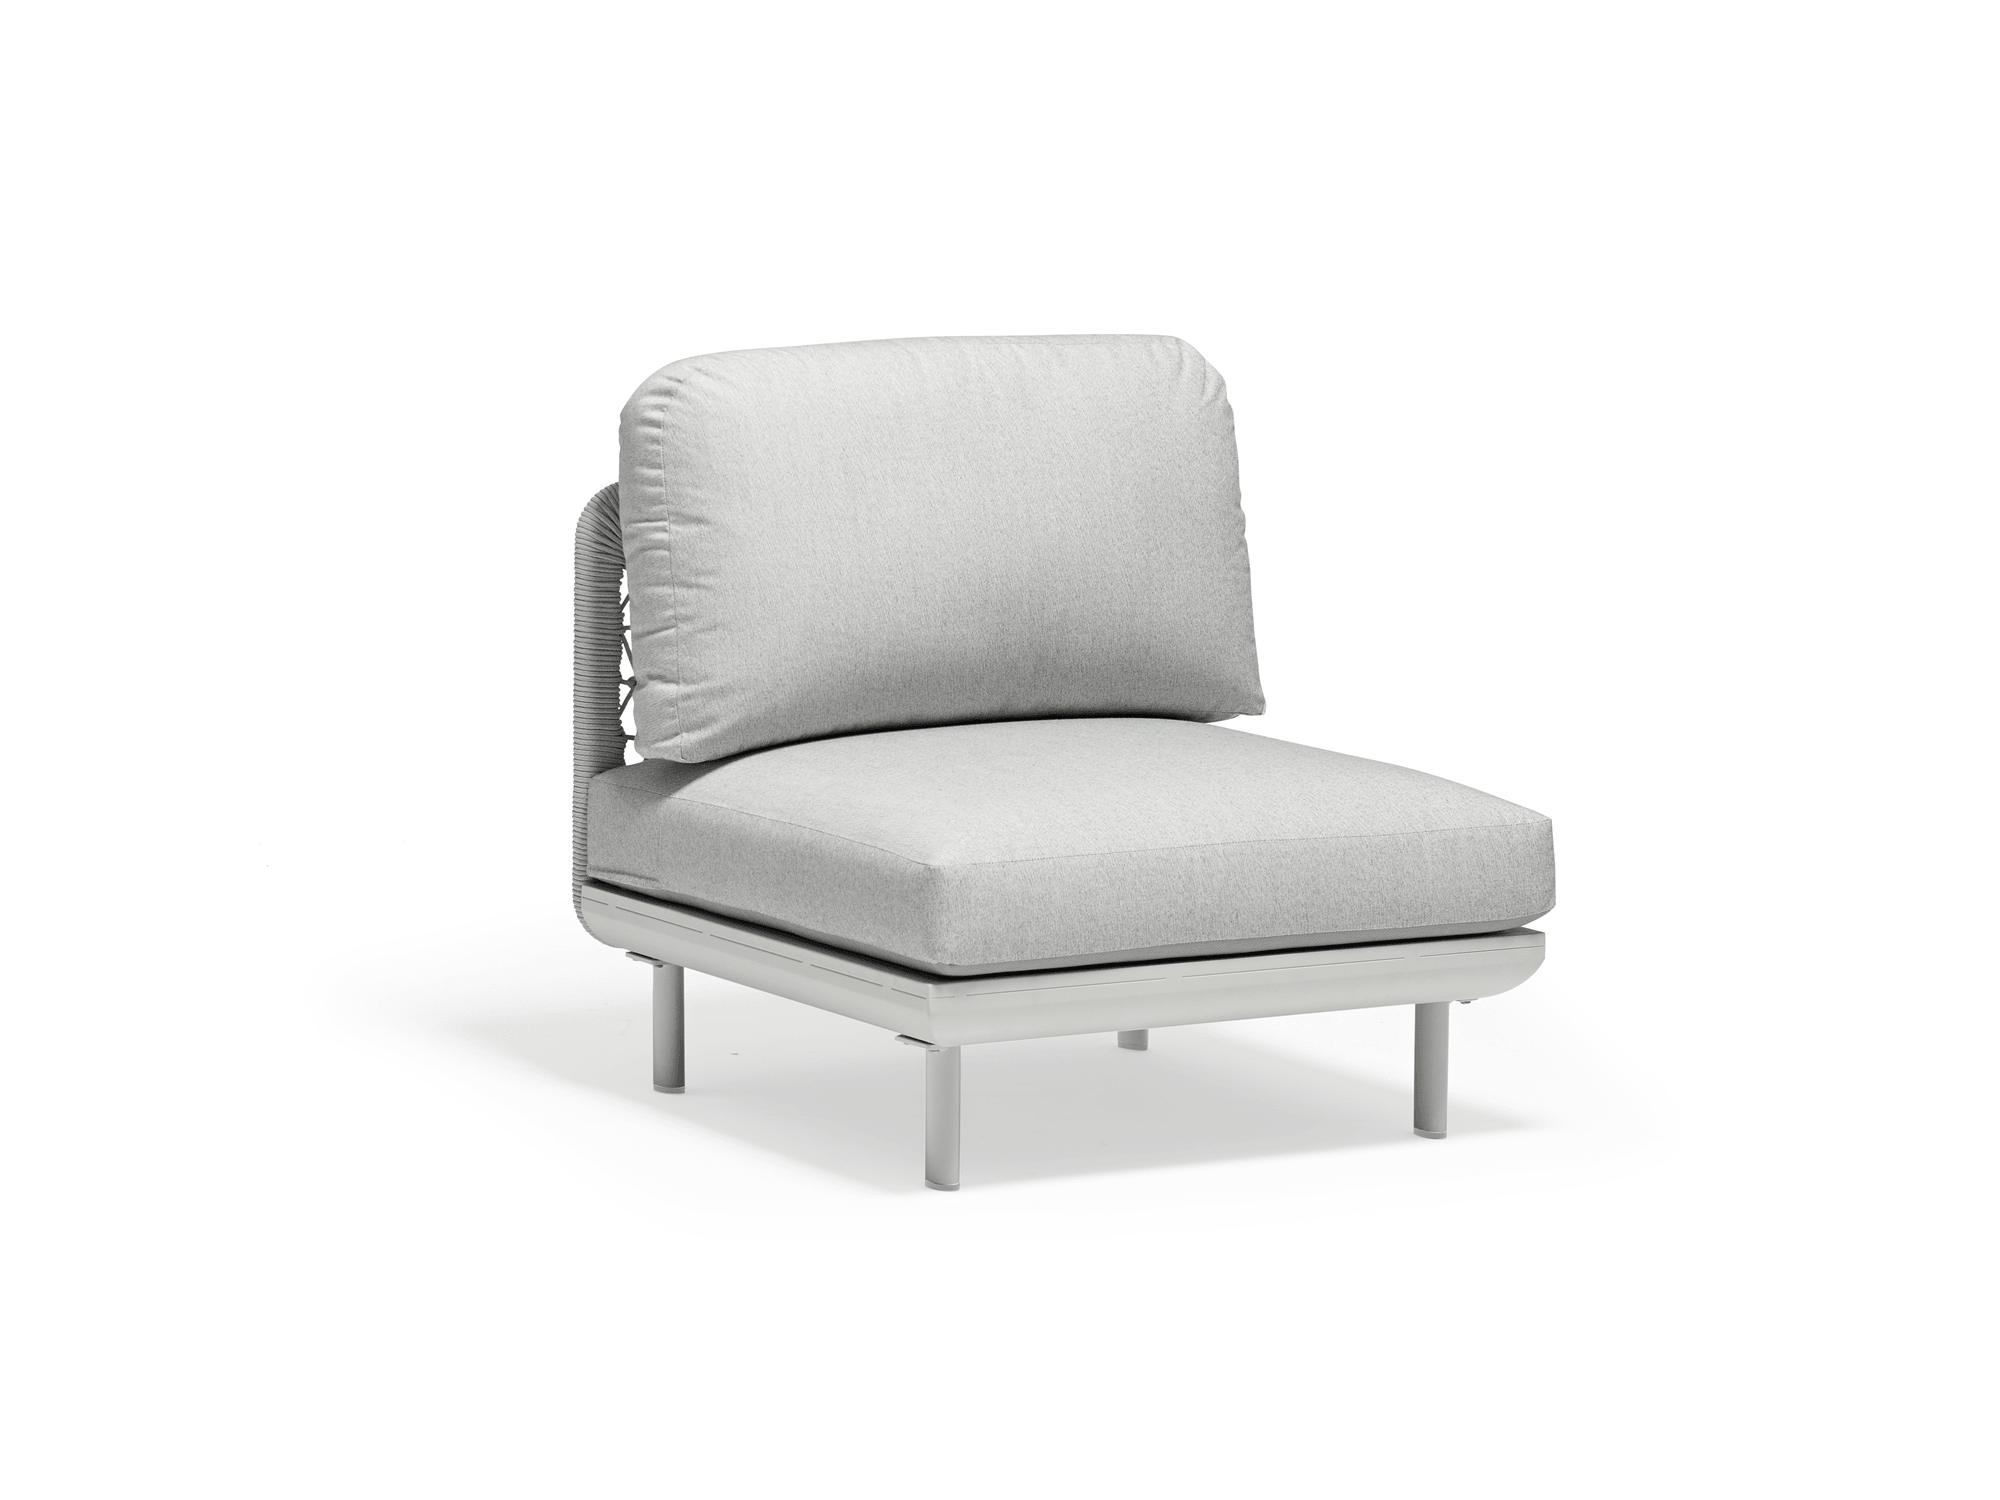 Amberly Armless Chair in Light Grey - Euro Living Furniture